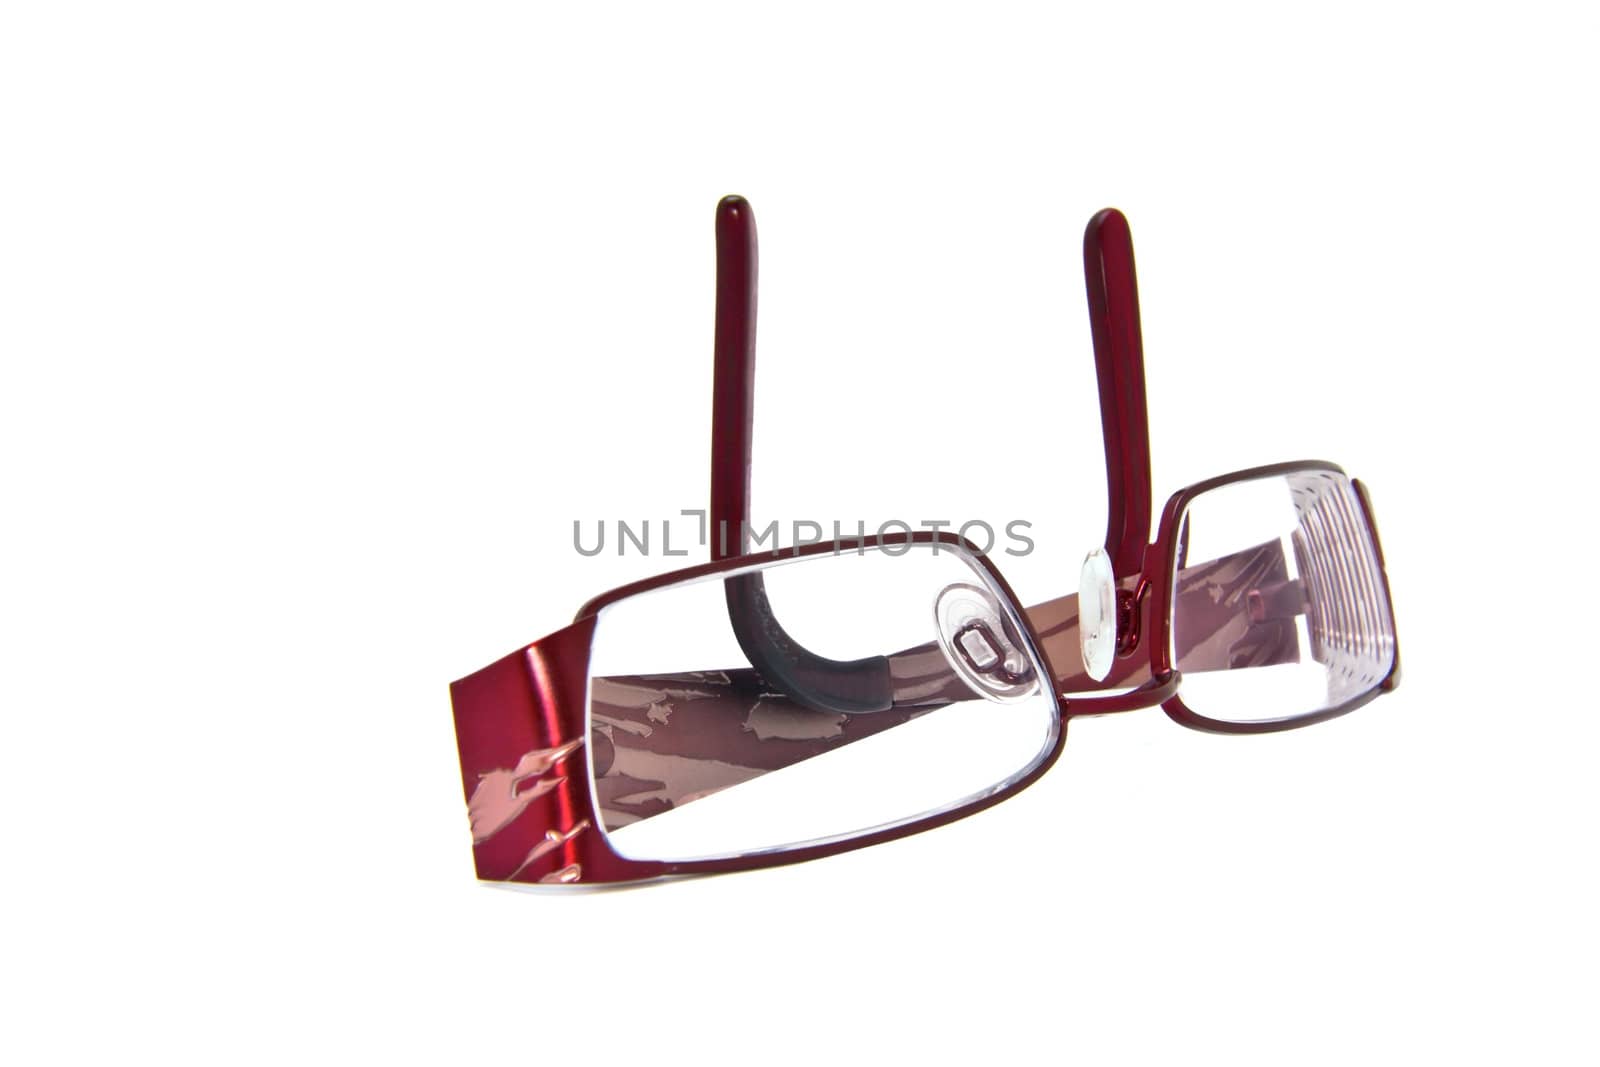 A  pair of  folded eye glasses on a white background